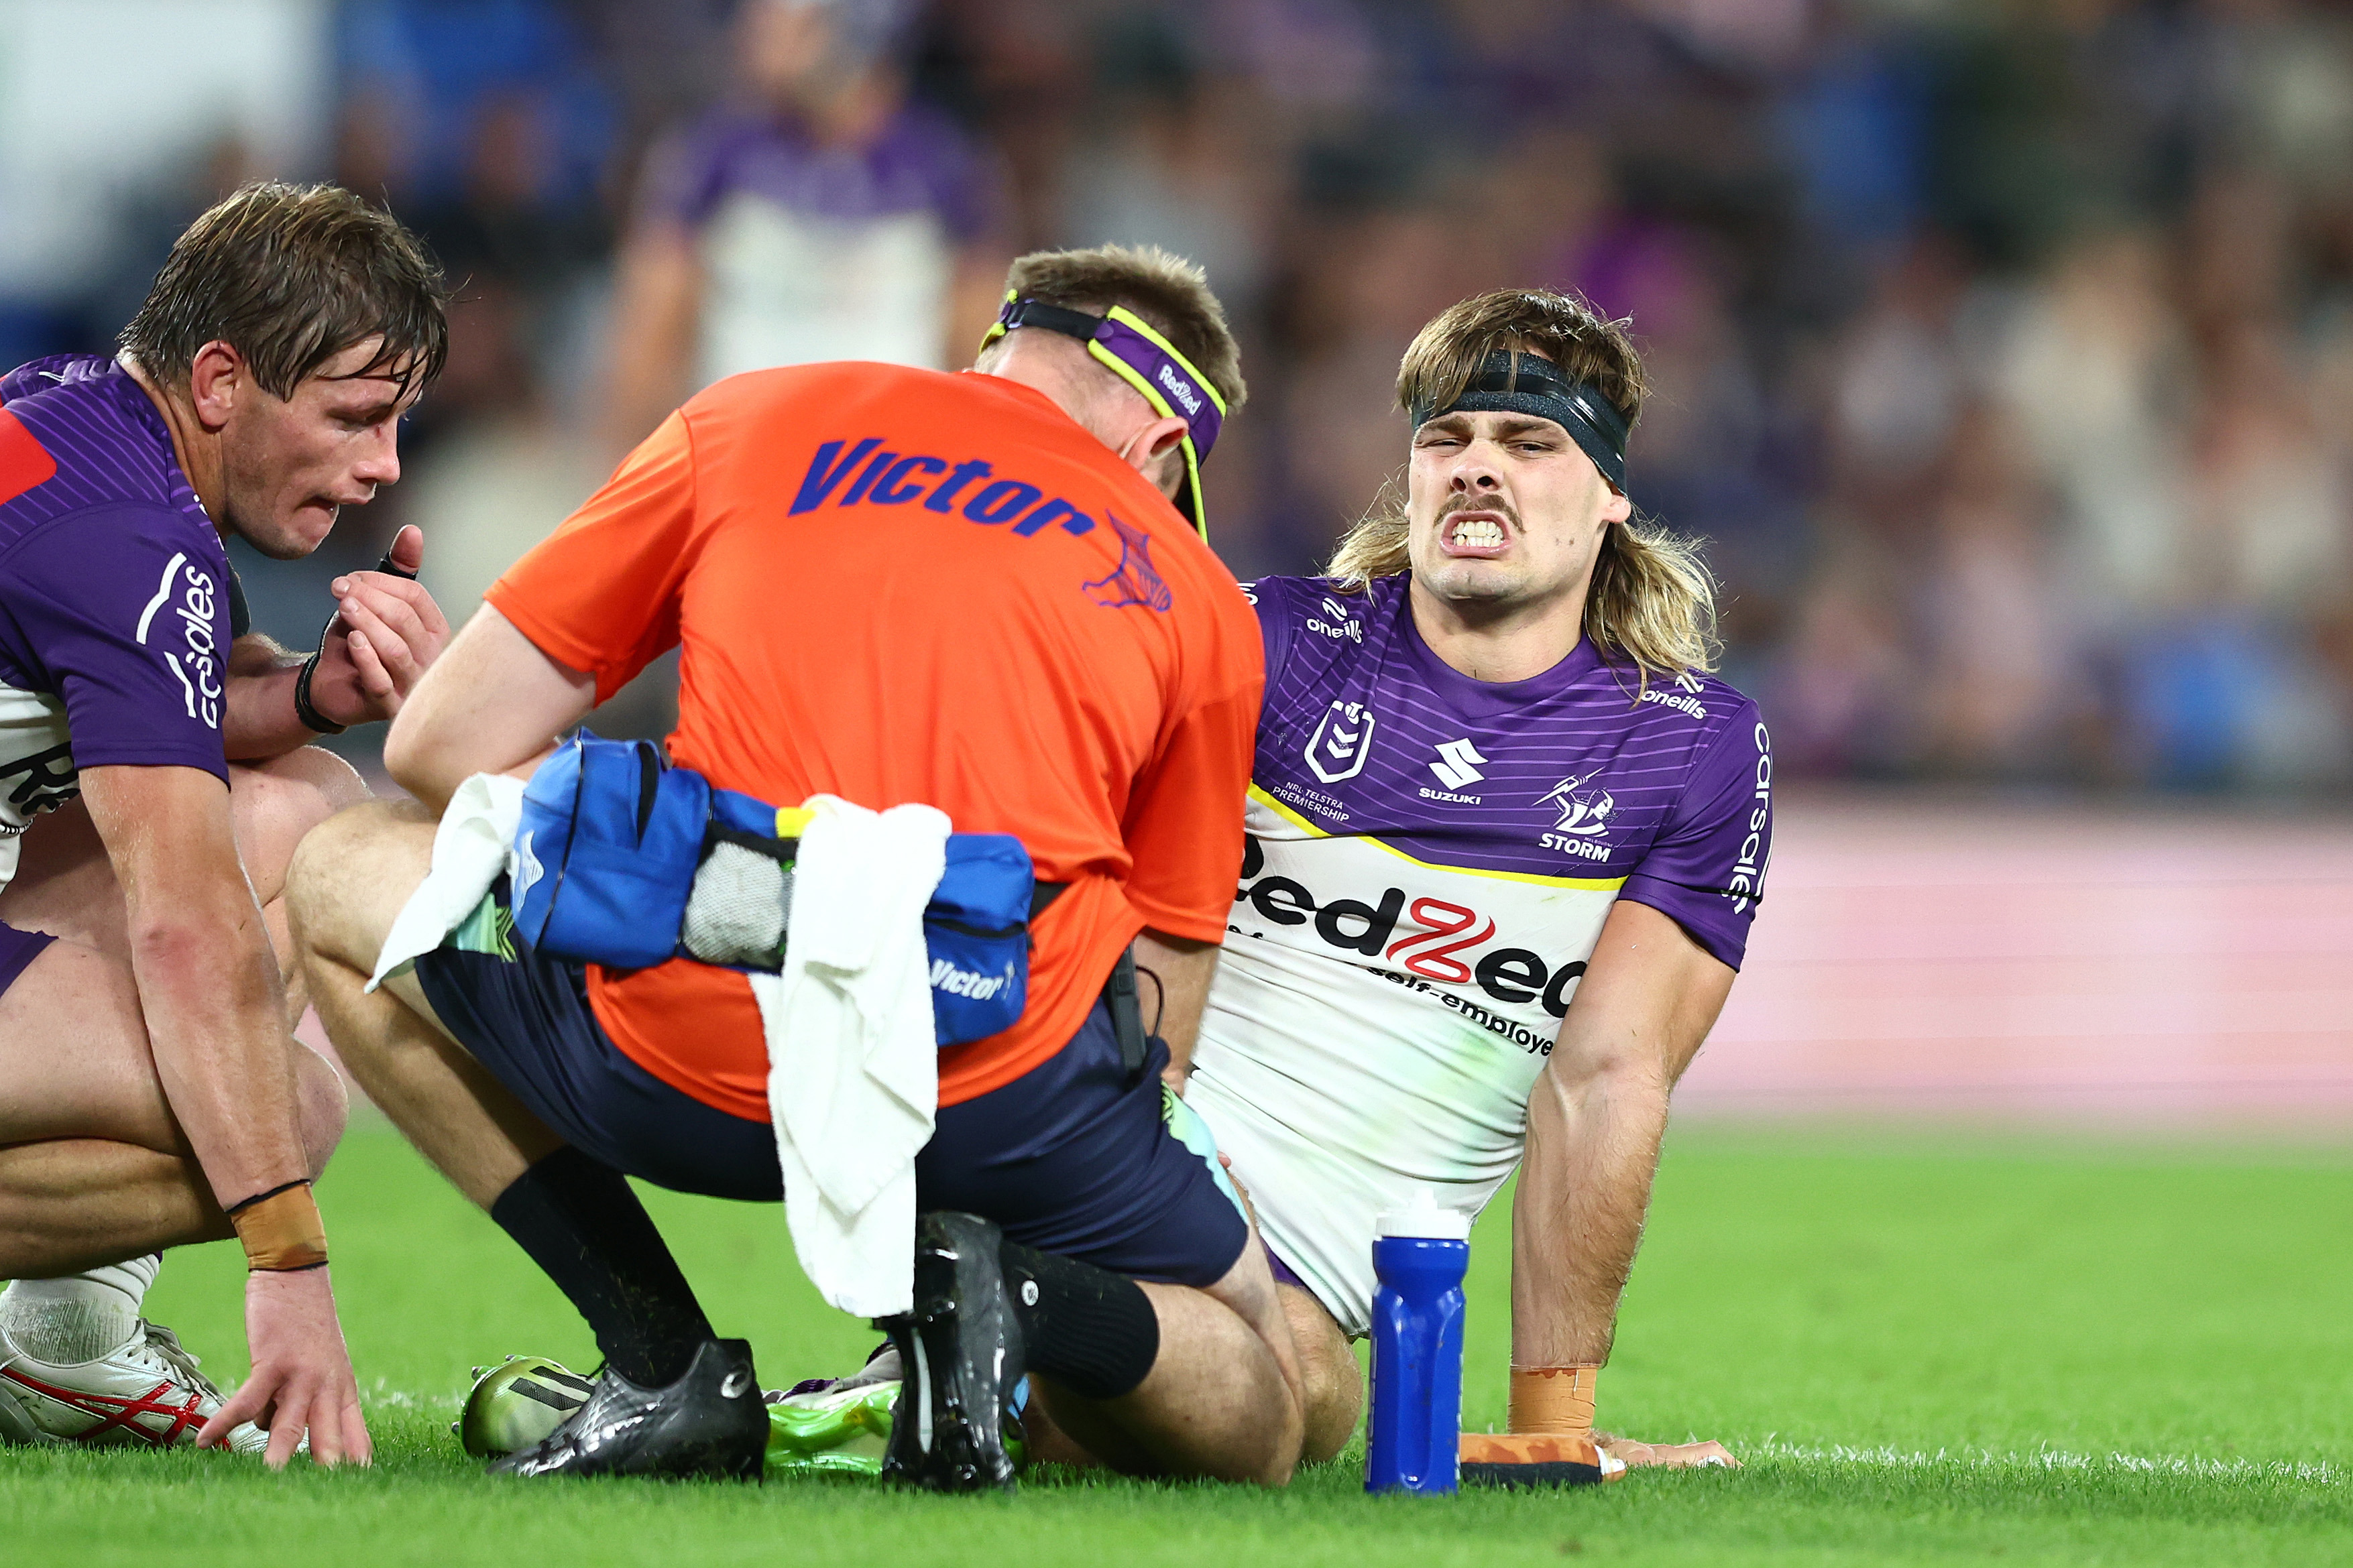 huge blow for storm with star's latest injury setback